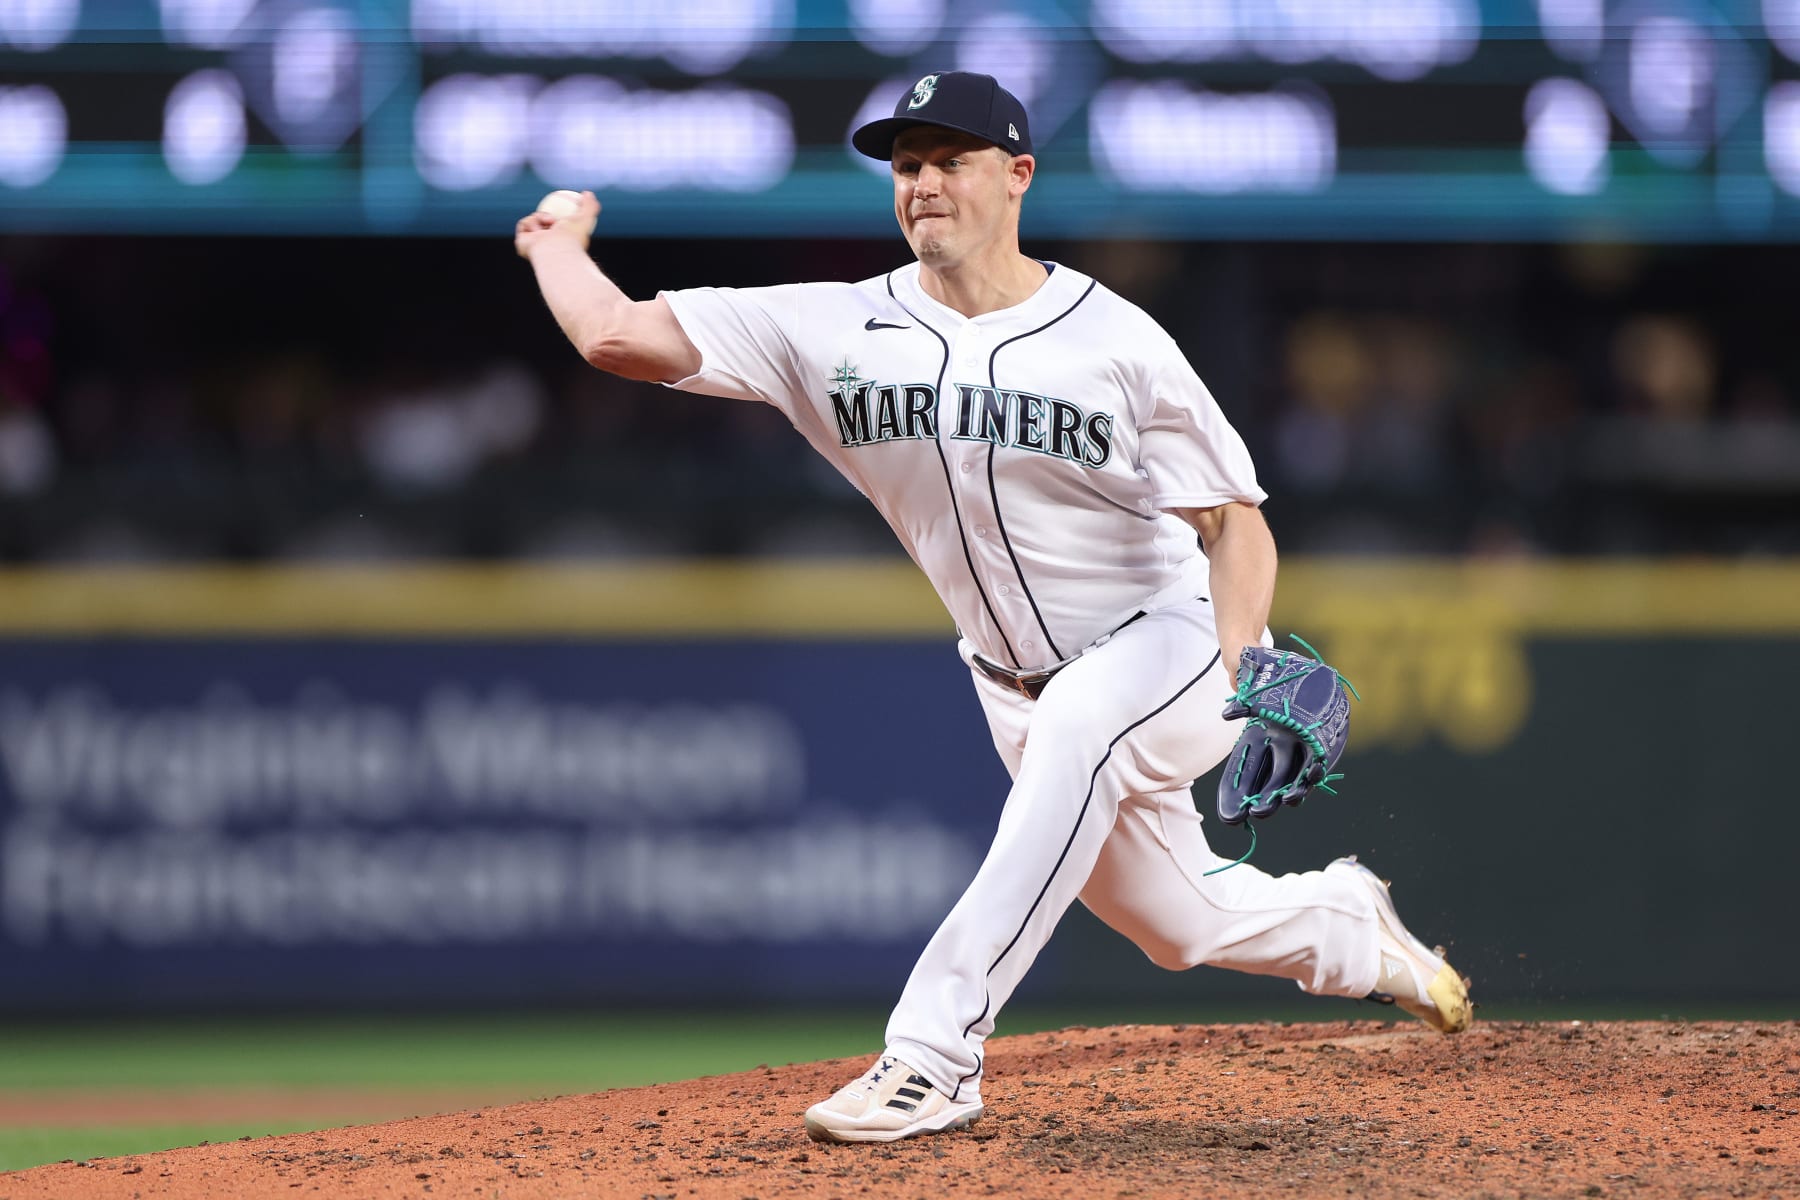 Sliding into opportunity: How the Mariners' Paul Sewald rekindled his  career - The Athletic